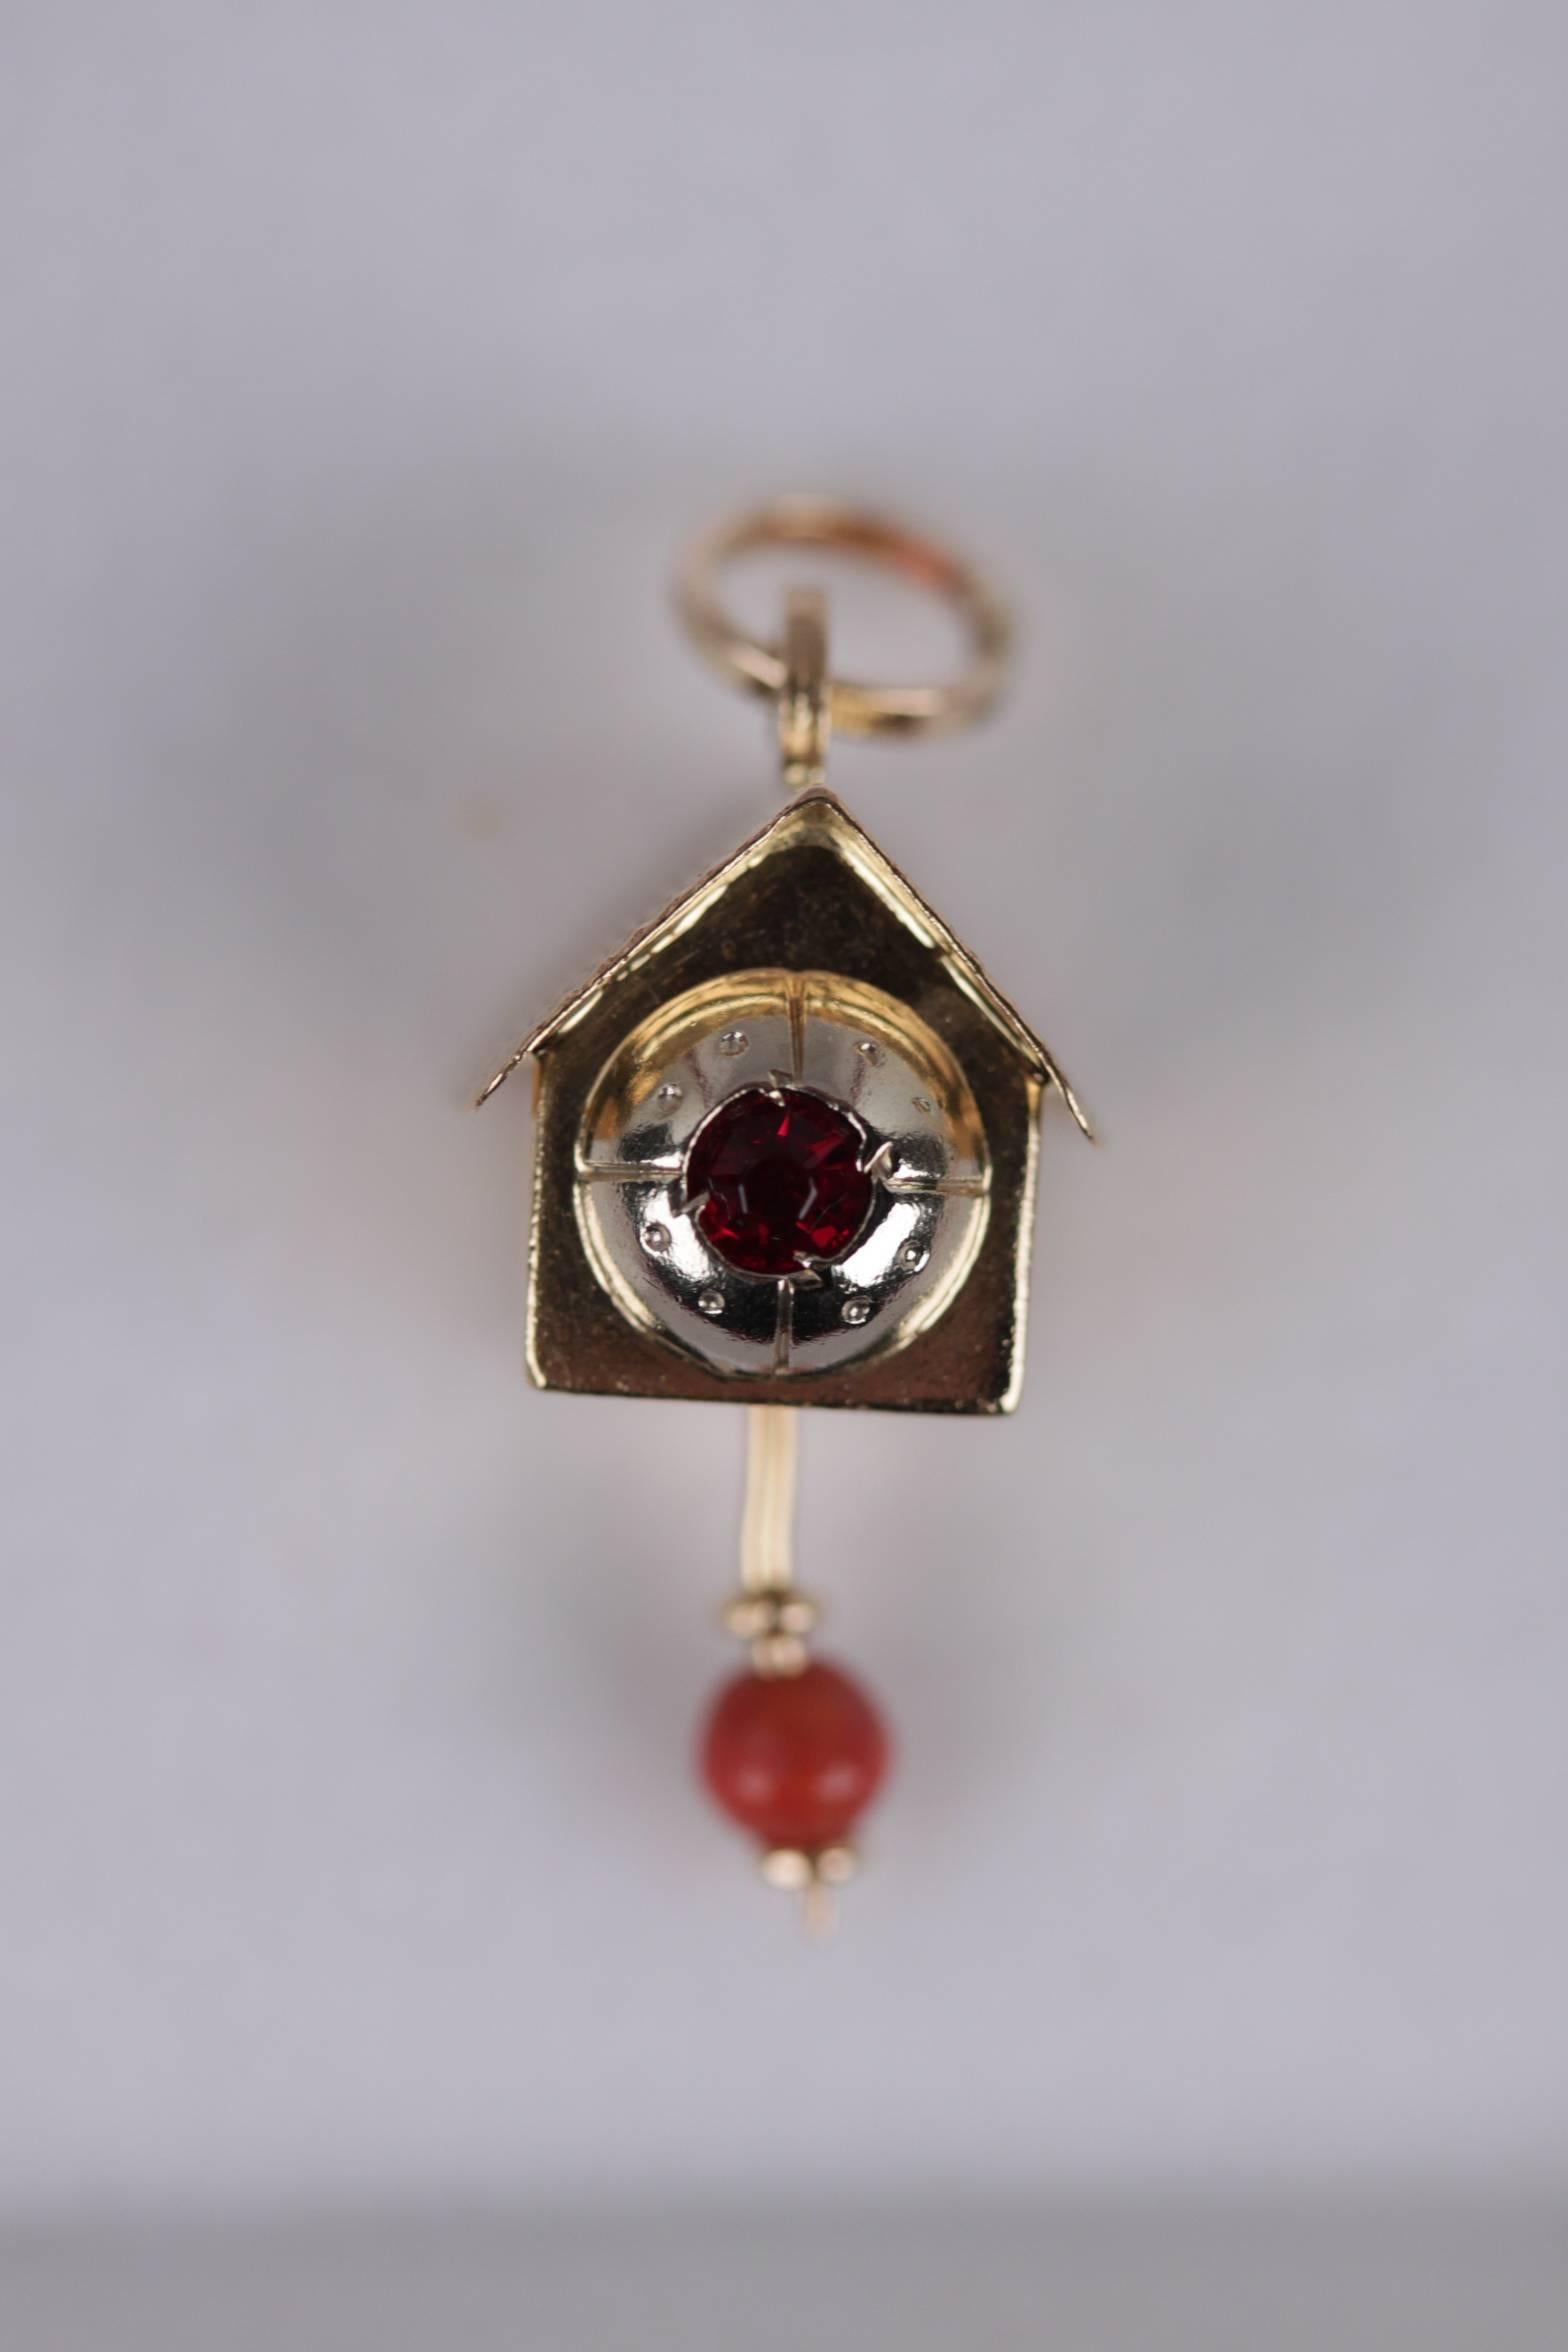 - Vintage 18k Yellow gold pendant in the shape of a cuckoo clock

- 'Engraved '750' hallmark on pendant 1AR

- Faceted ruby stone on the front

- Moving bead pendulum

- Comes with a red velvet case

- Total lenght: 2,5 cm - 1